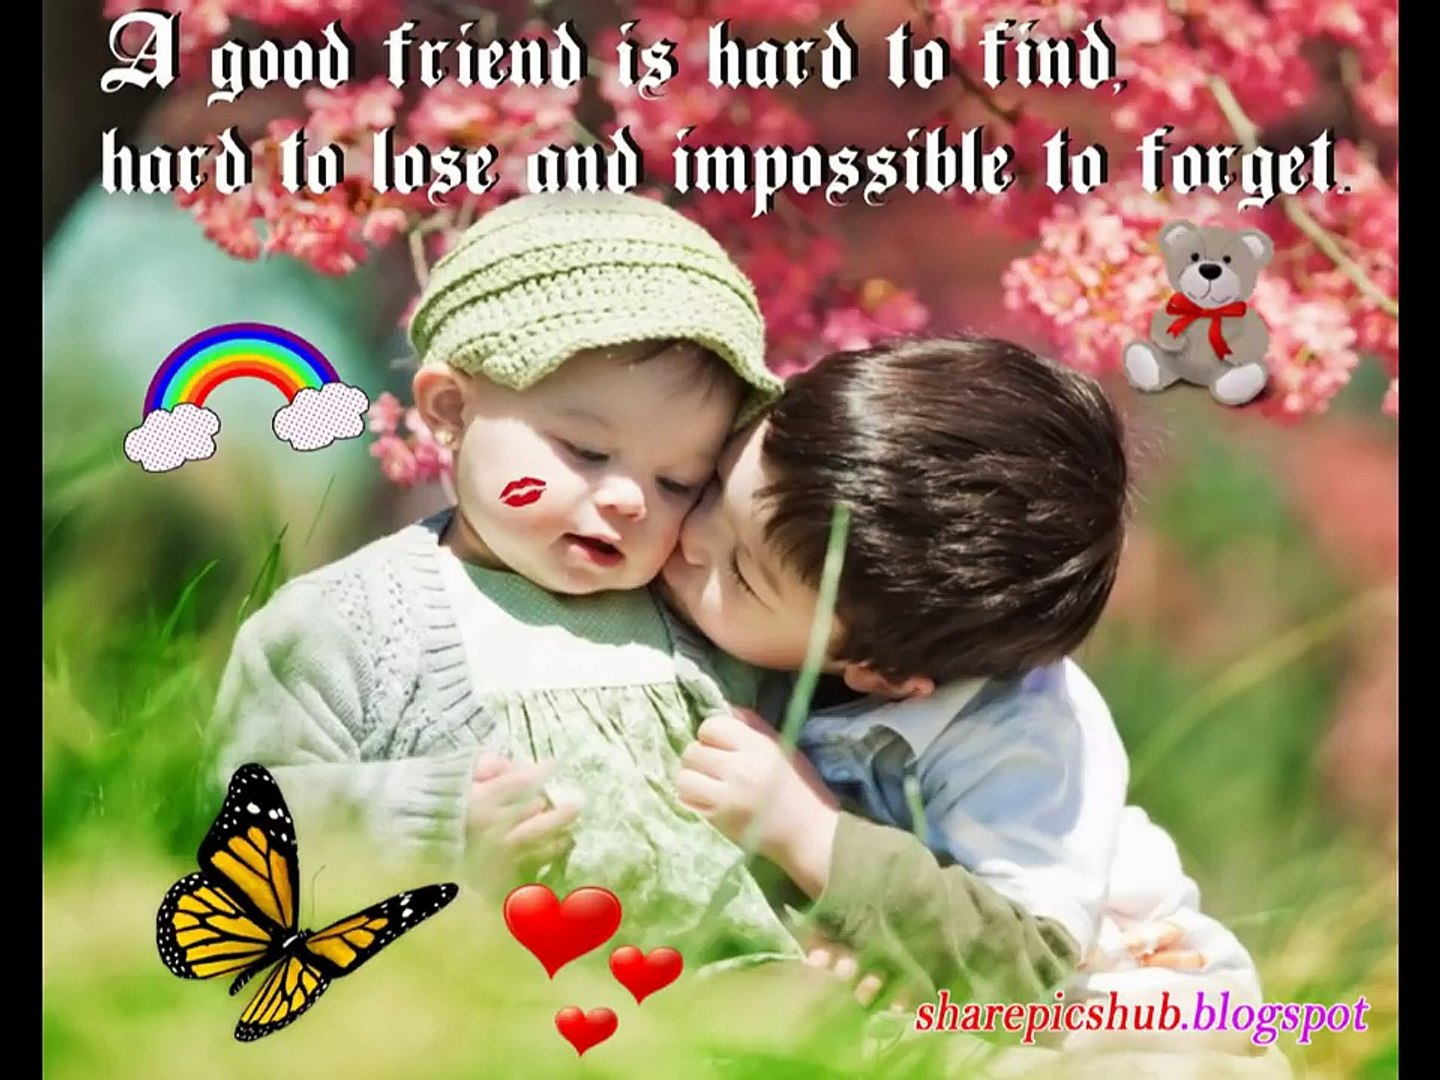 Friendship Day In Pakistan Most Heart Touching Friendship Poem Best Urdu Friendship Poem Dosti Poem Friendship Video Dailymotion